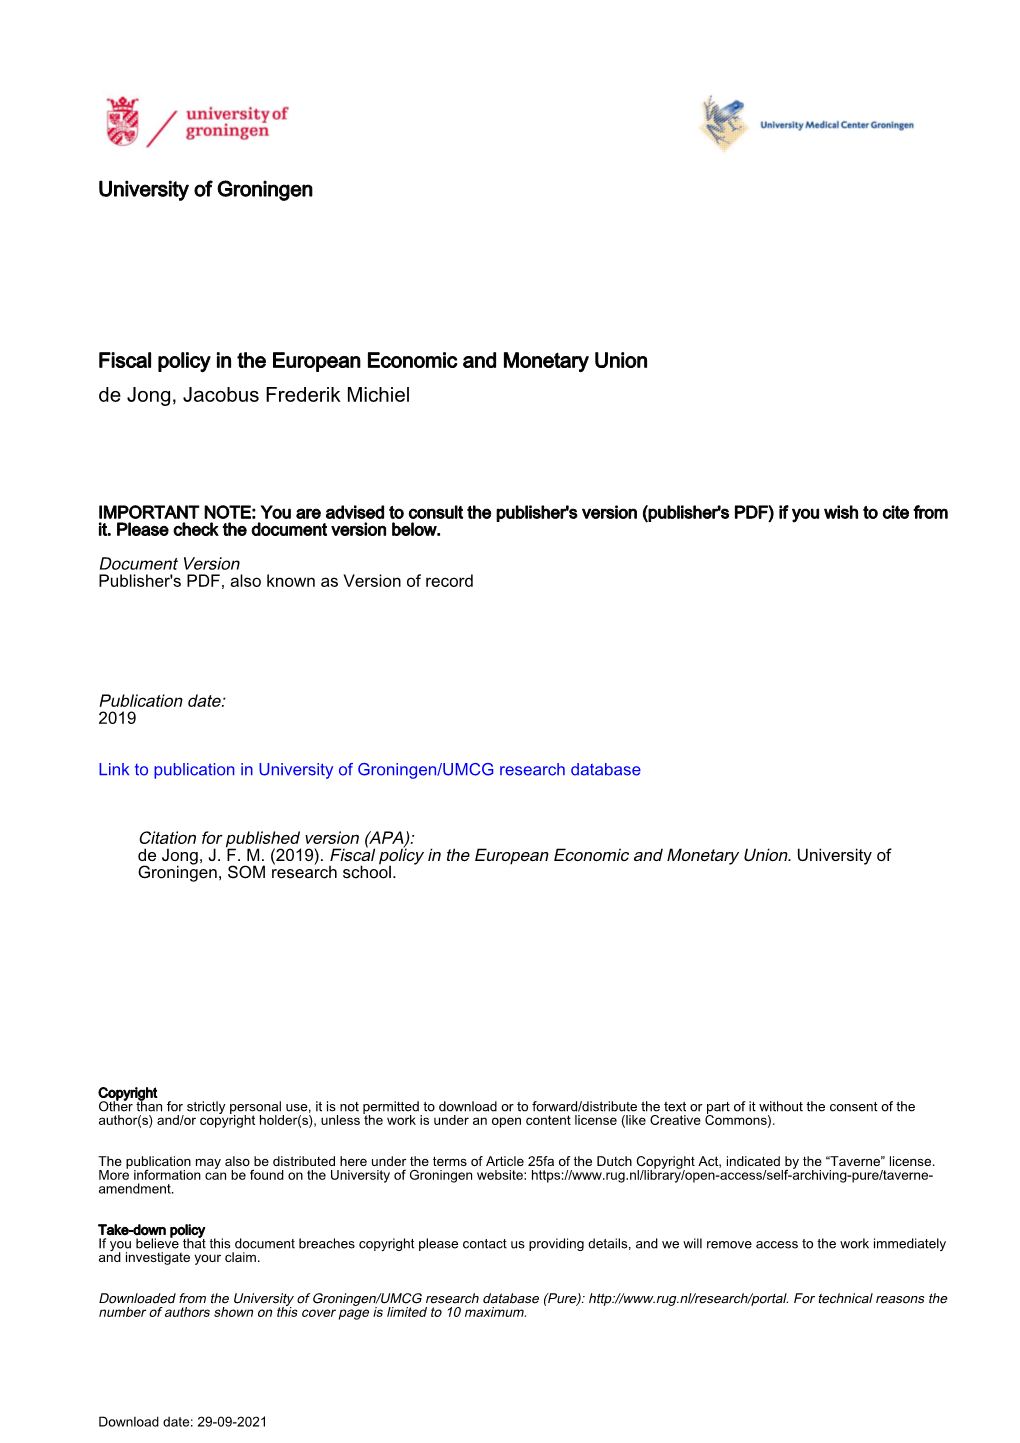 University of Groningen Fiscal Policy in the European Economic And